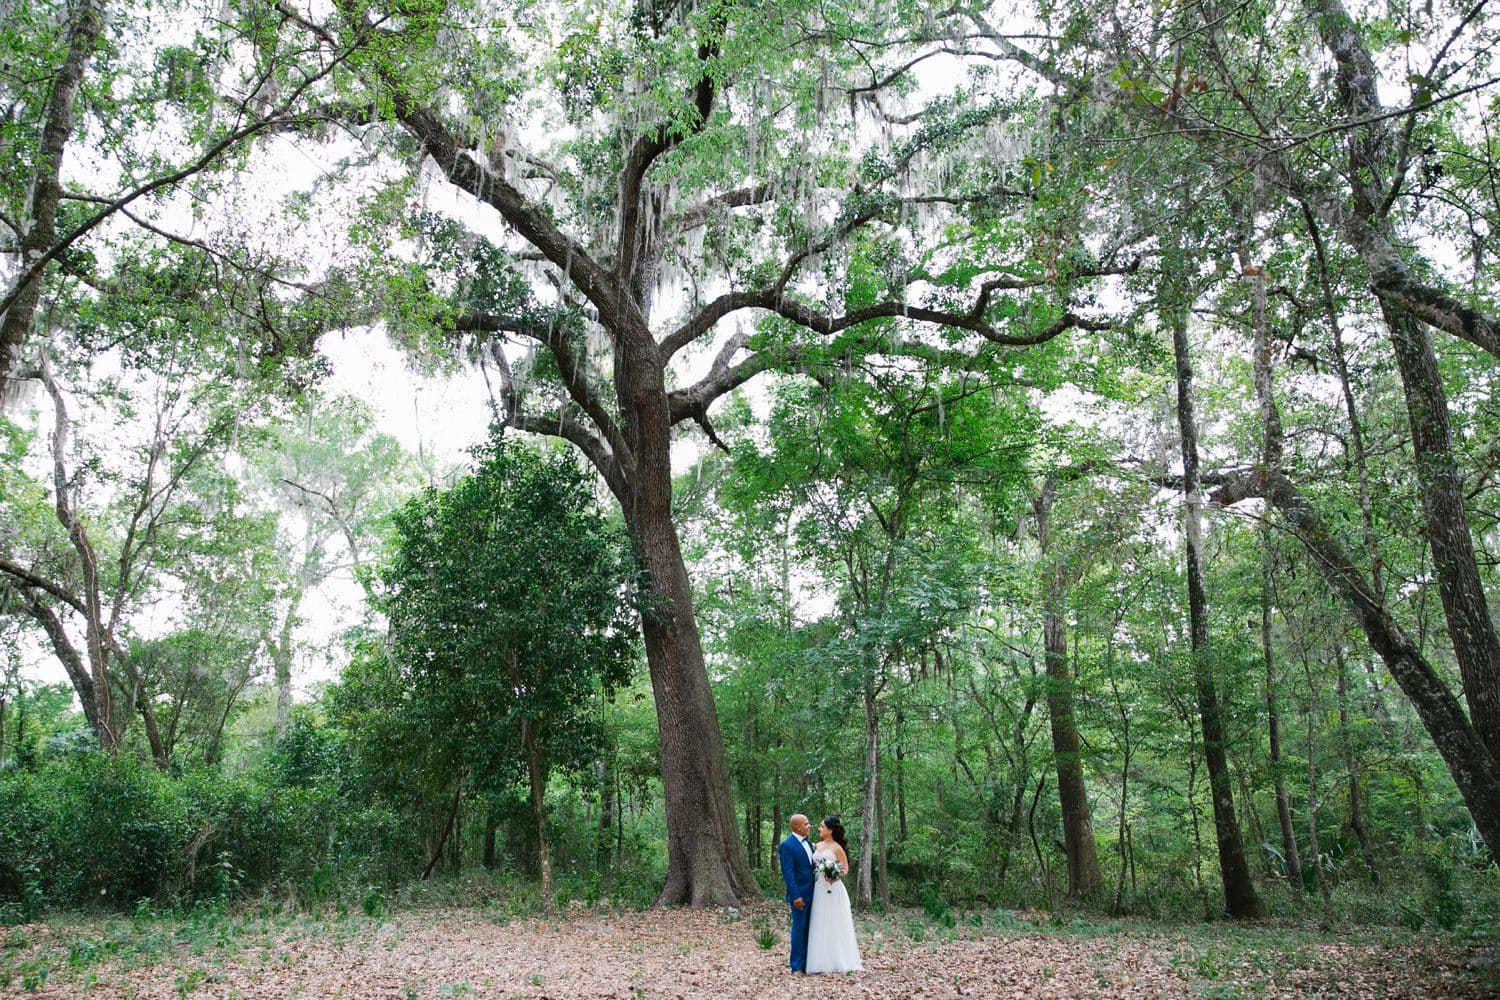 This first look at October Oaks Farm was adorable. Rustic Chic Wedding